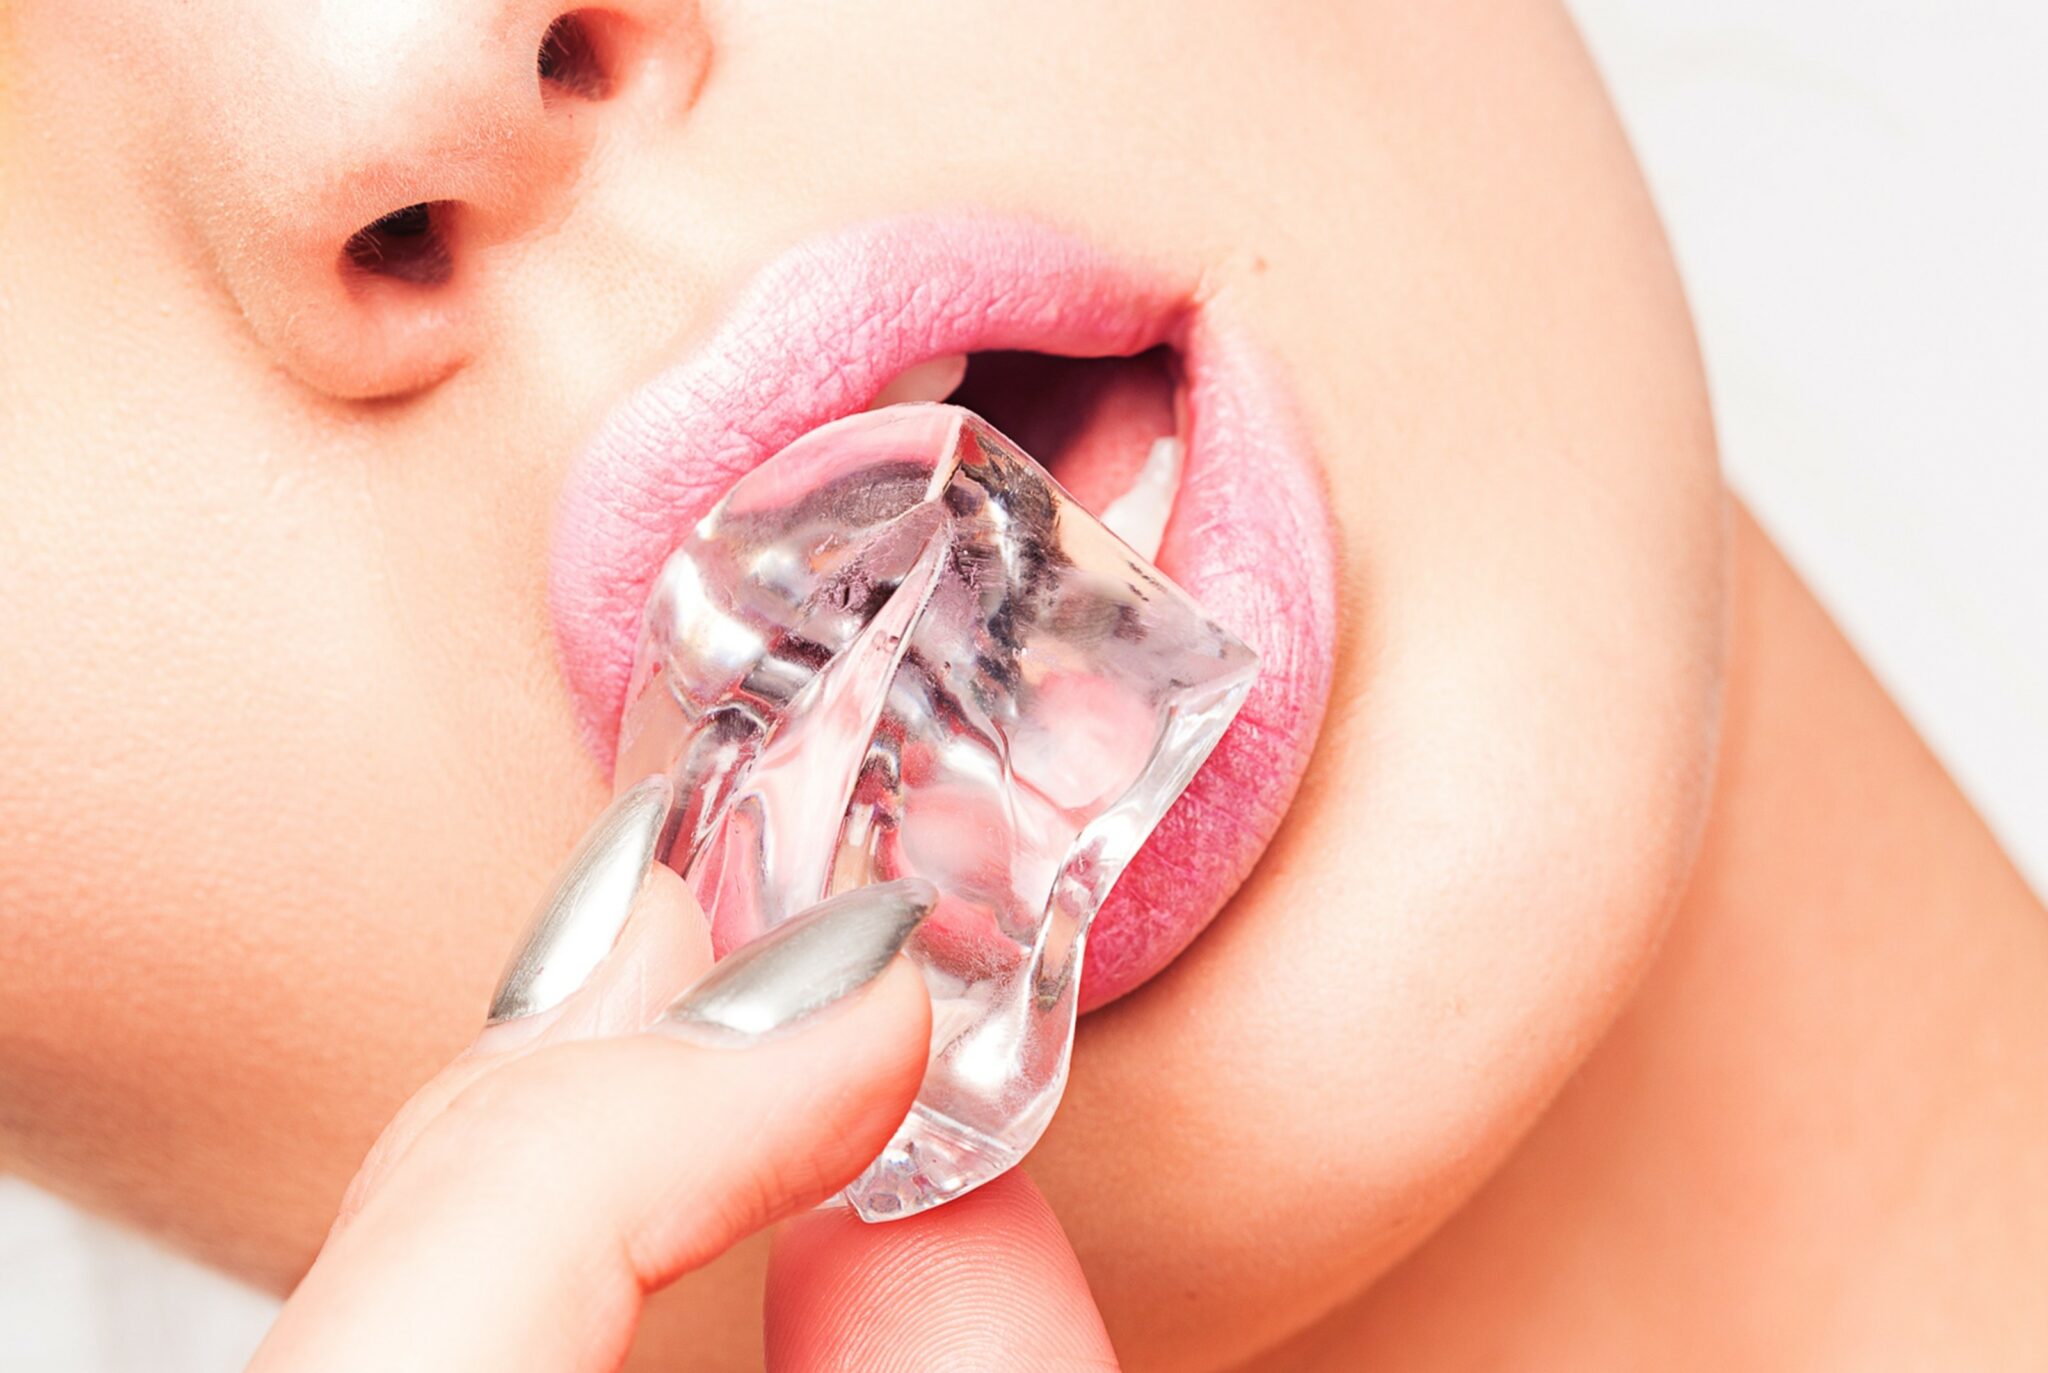 A woman holding an ice cube between her lips.